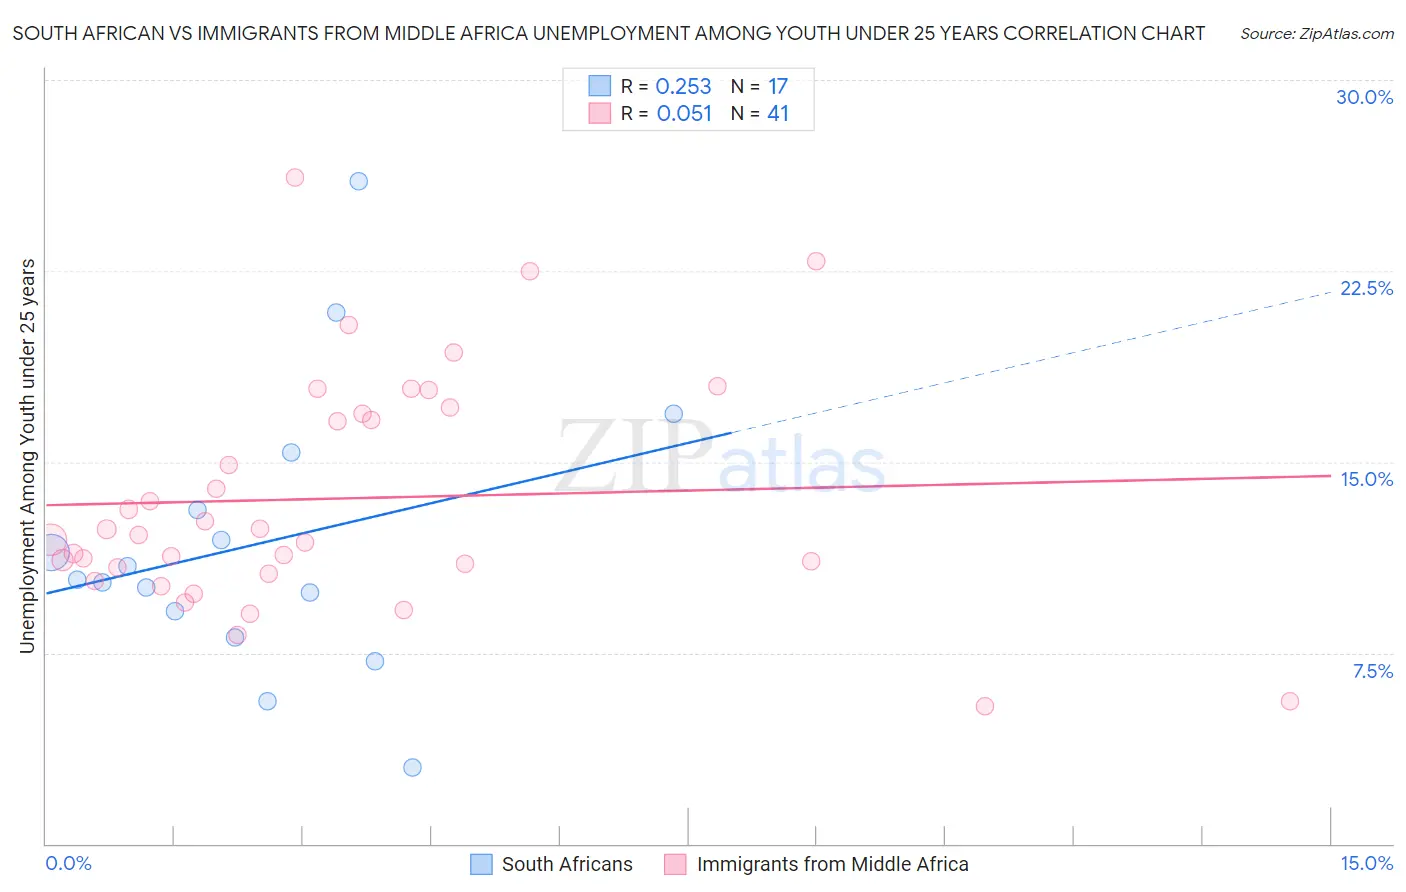 South African vs Immigrants from Middle Africa Unemployment Among Youth under 25 years